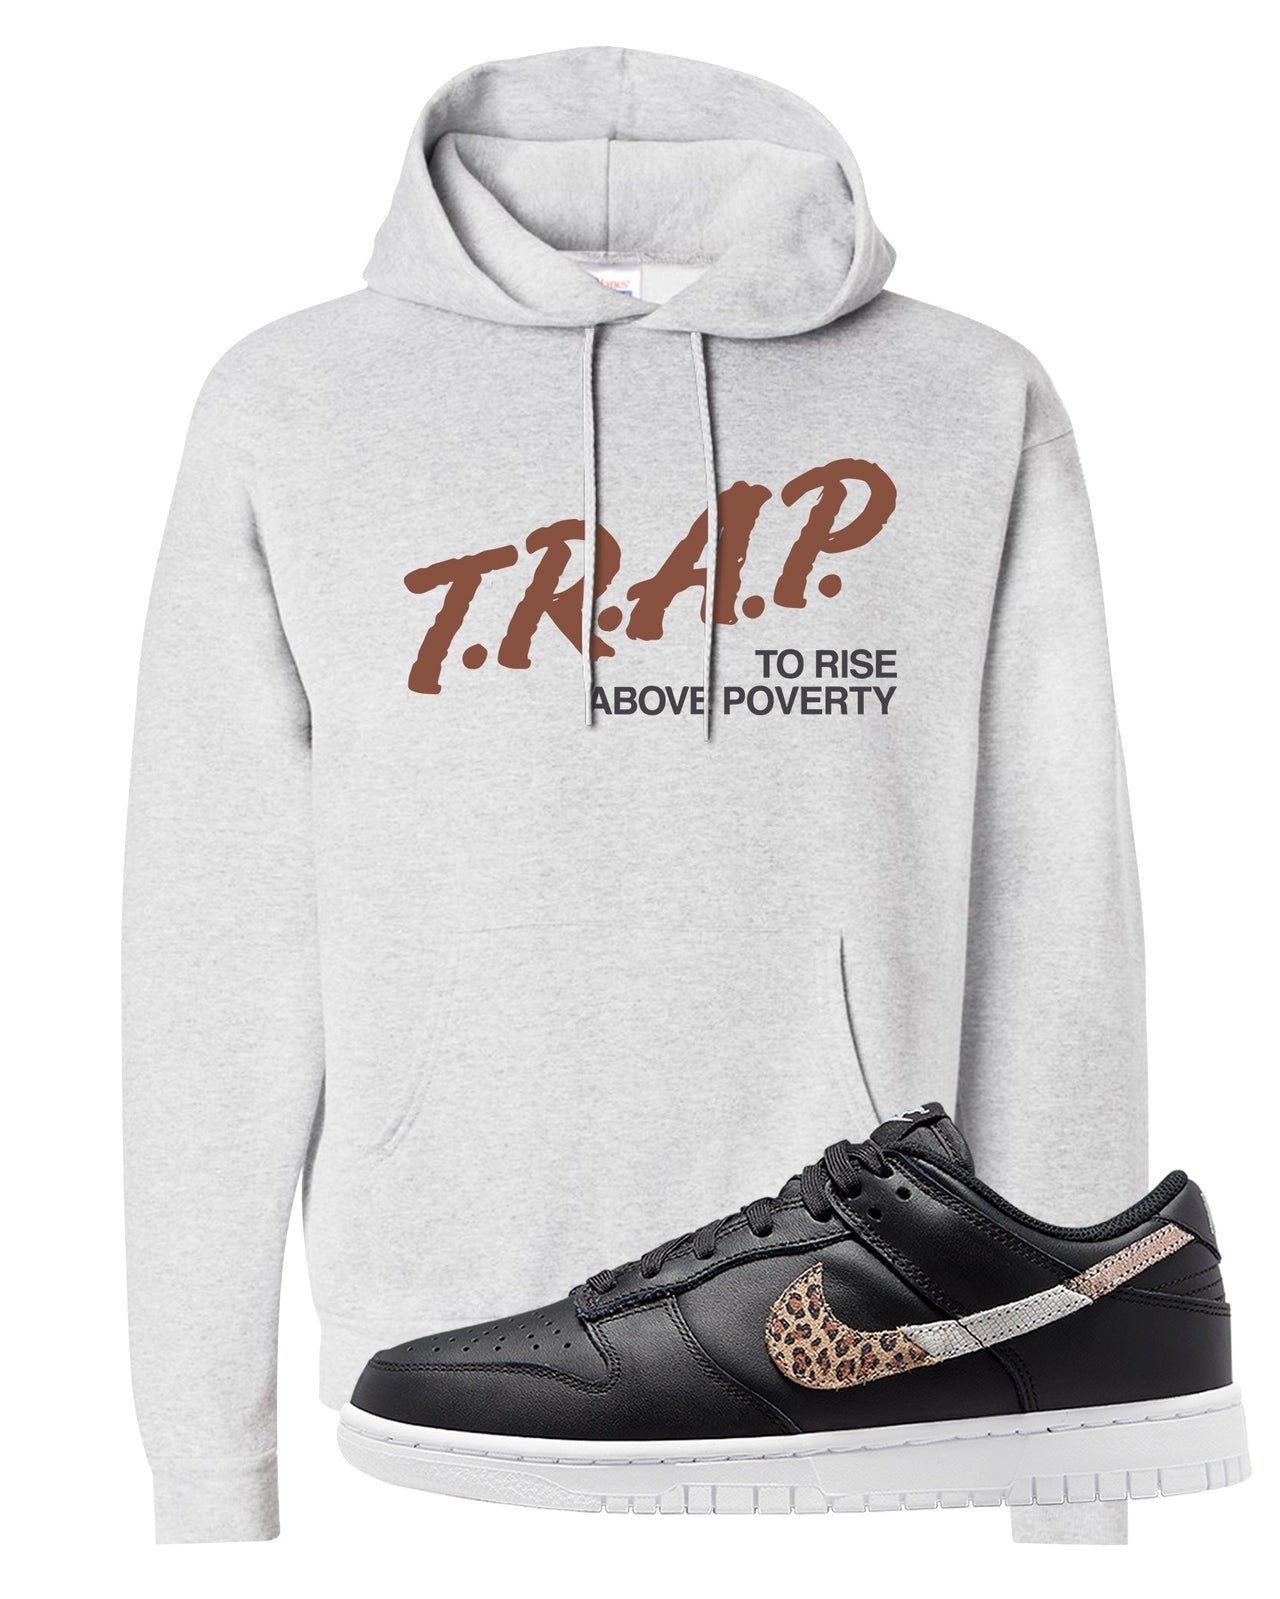 Primal Black Leopard Low Dunks Hoodie | Trap To Rise Above Poverty, Ash